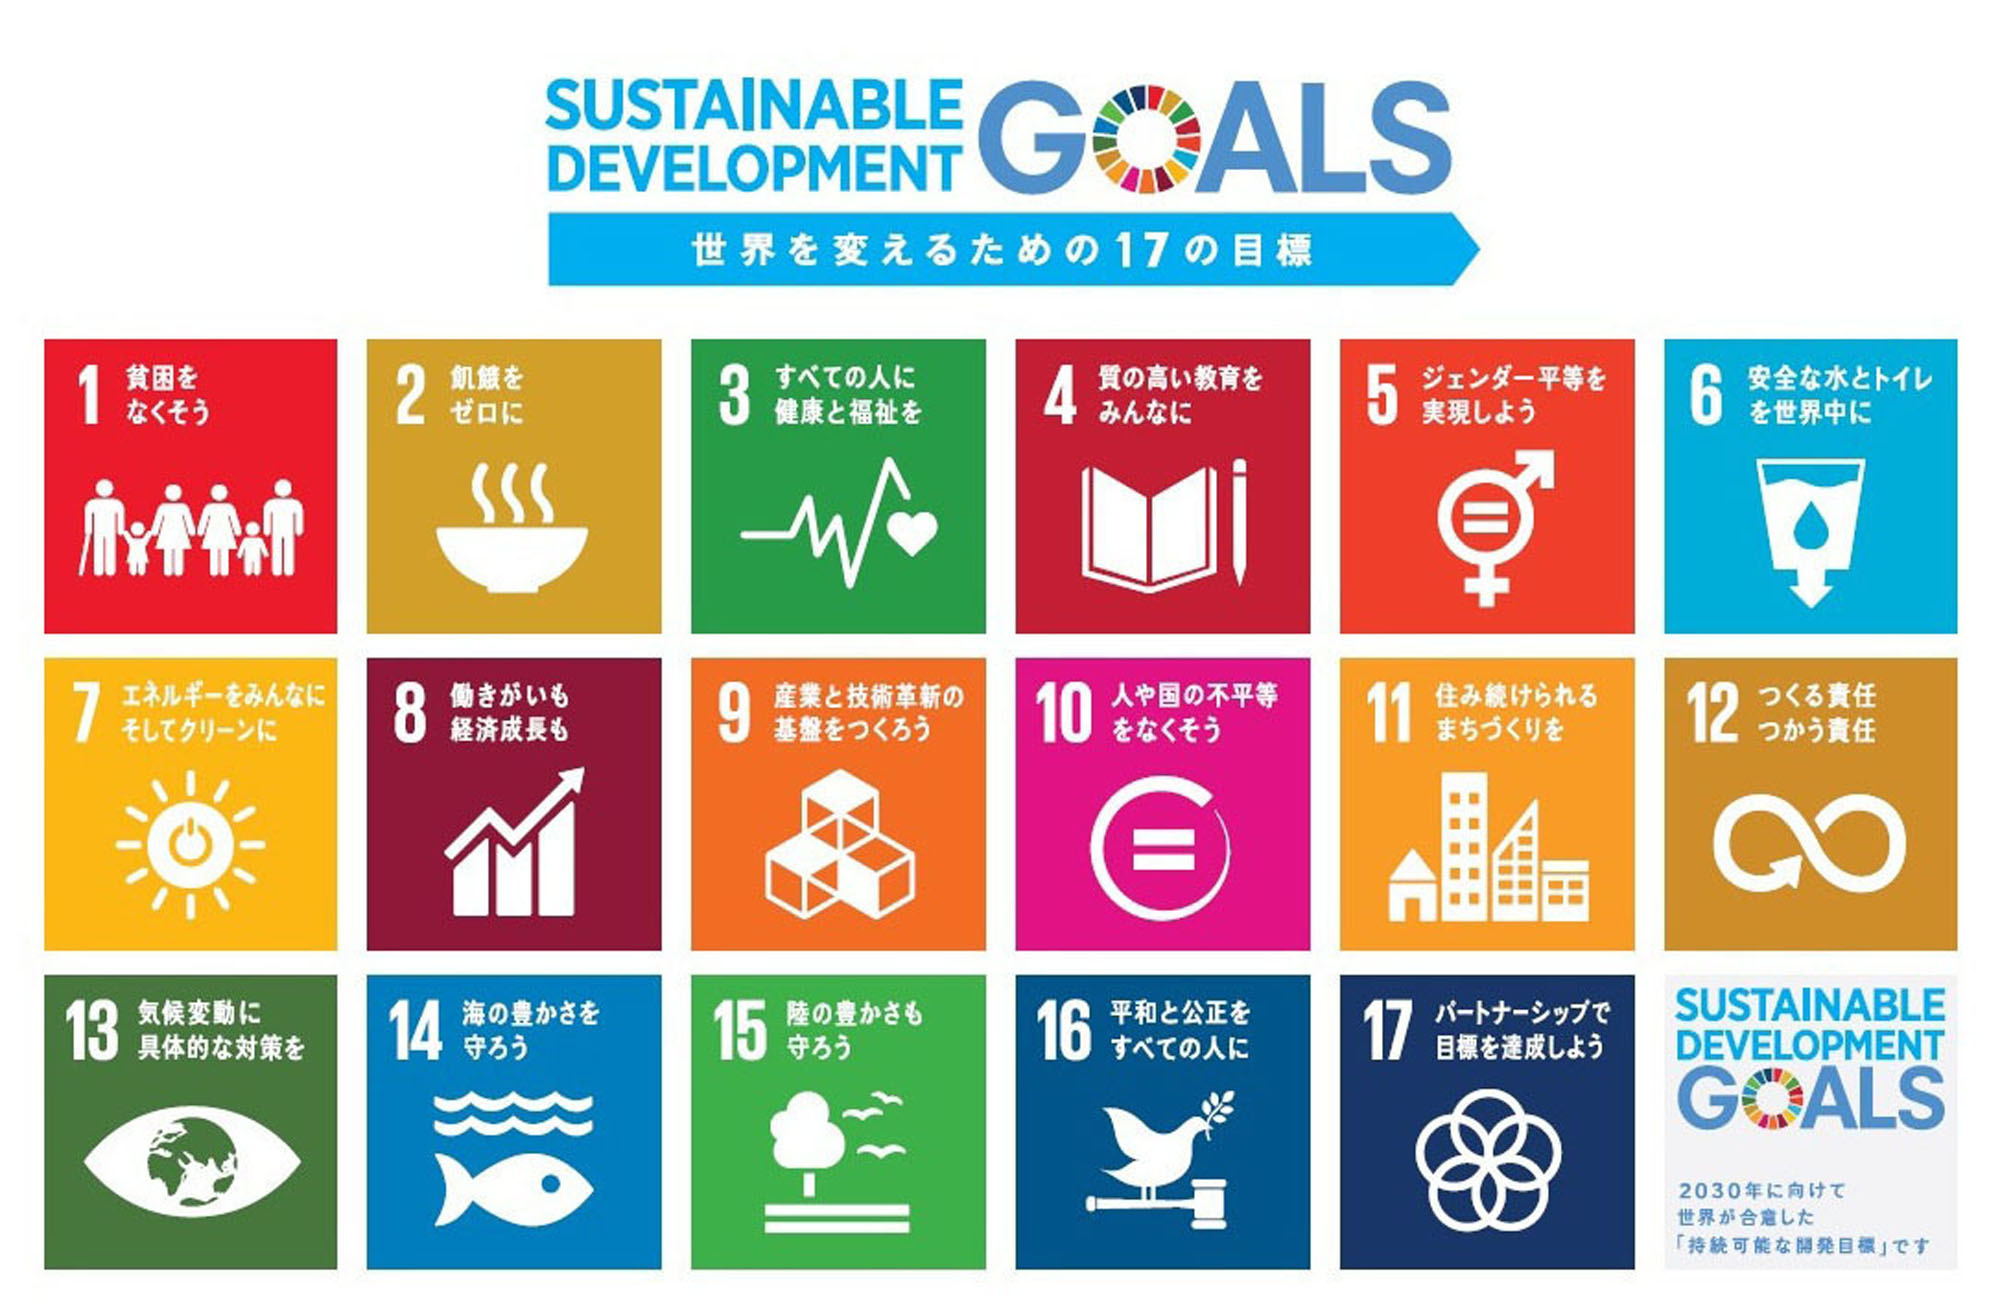 The logo for the 2030 United Nations Sustainable Development Goals | UNITED NATIONS / VIA KYODO